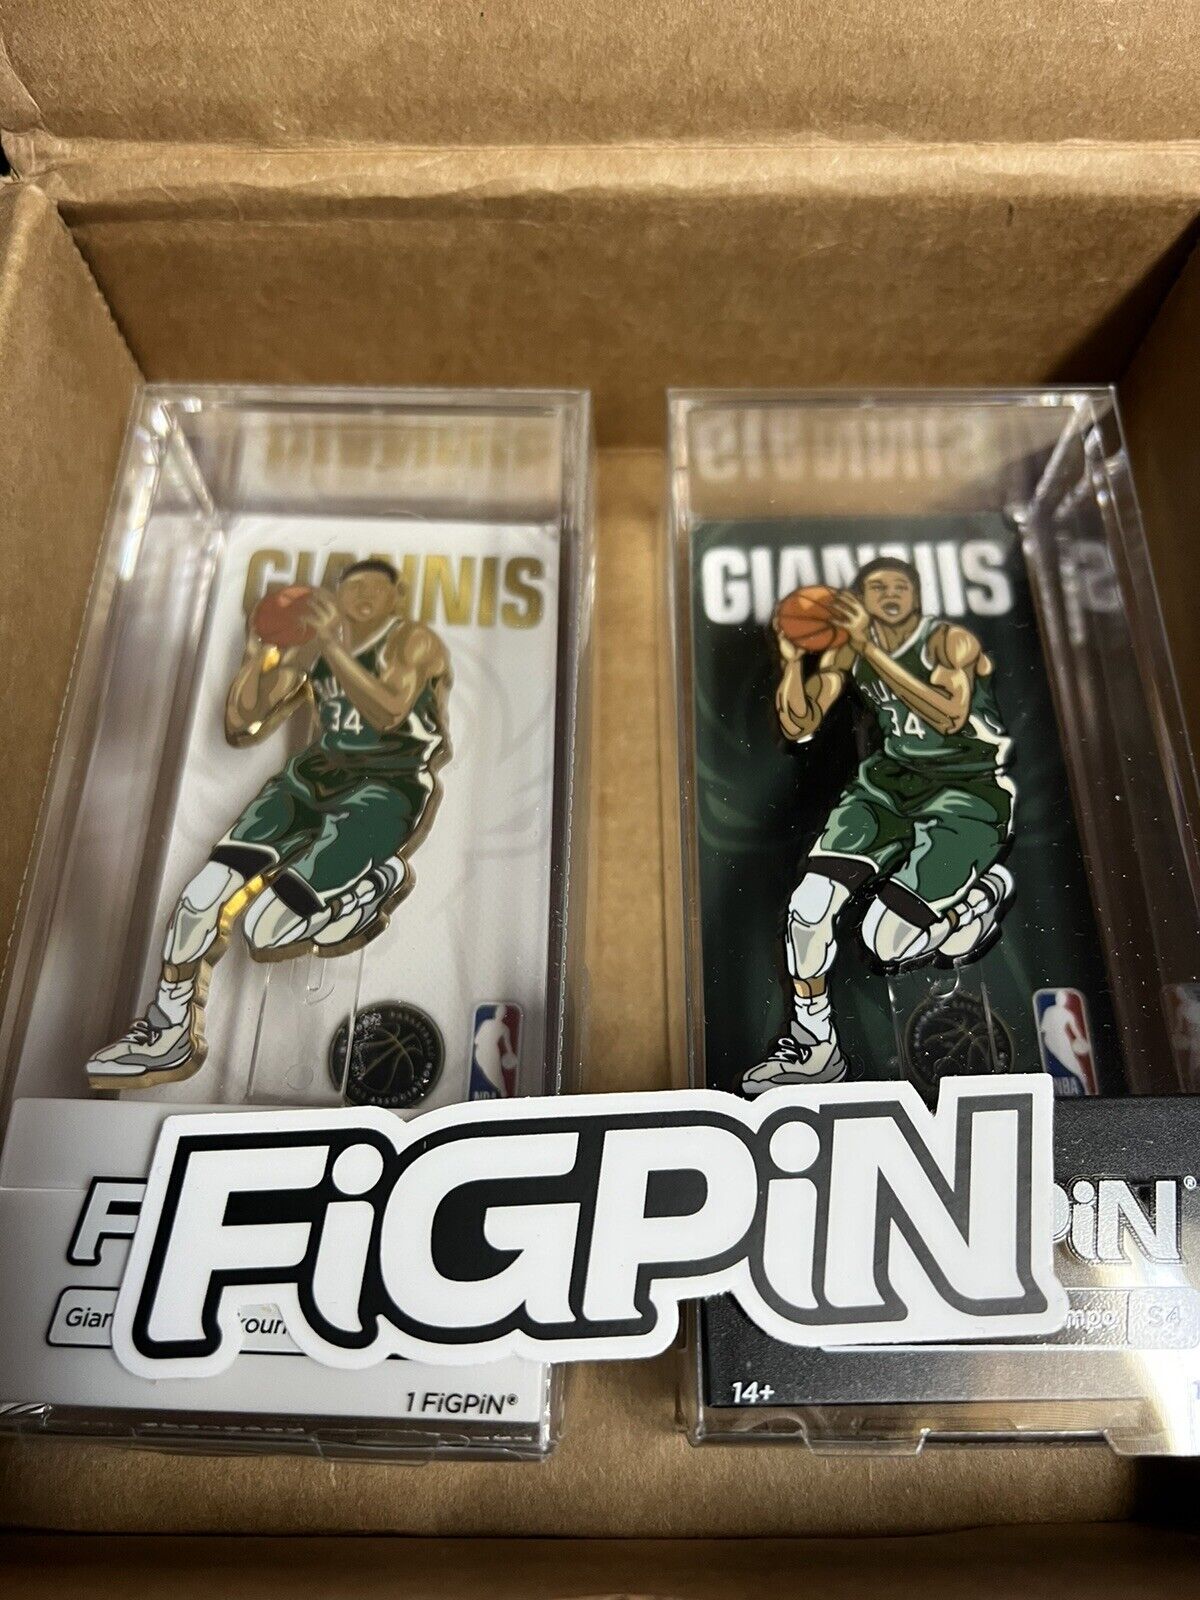 *LOCKED* Giannis Antetokounmpo FIGPIN Chase LE 1000 S10 with UNLOCKED base S4